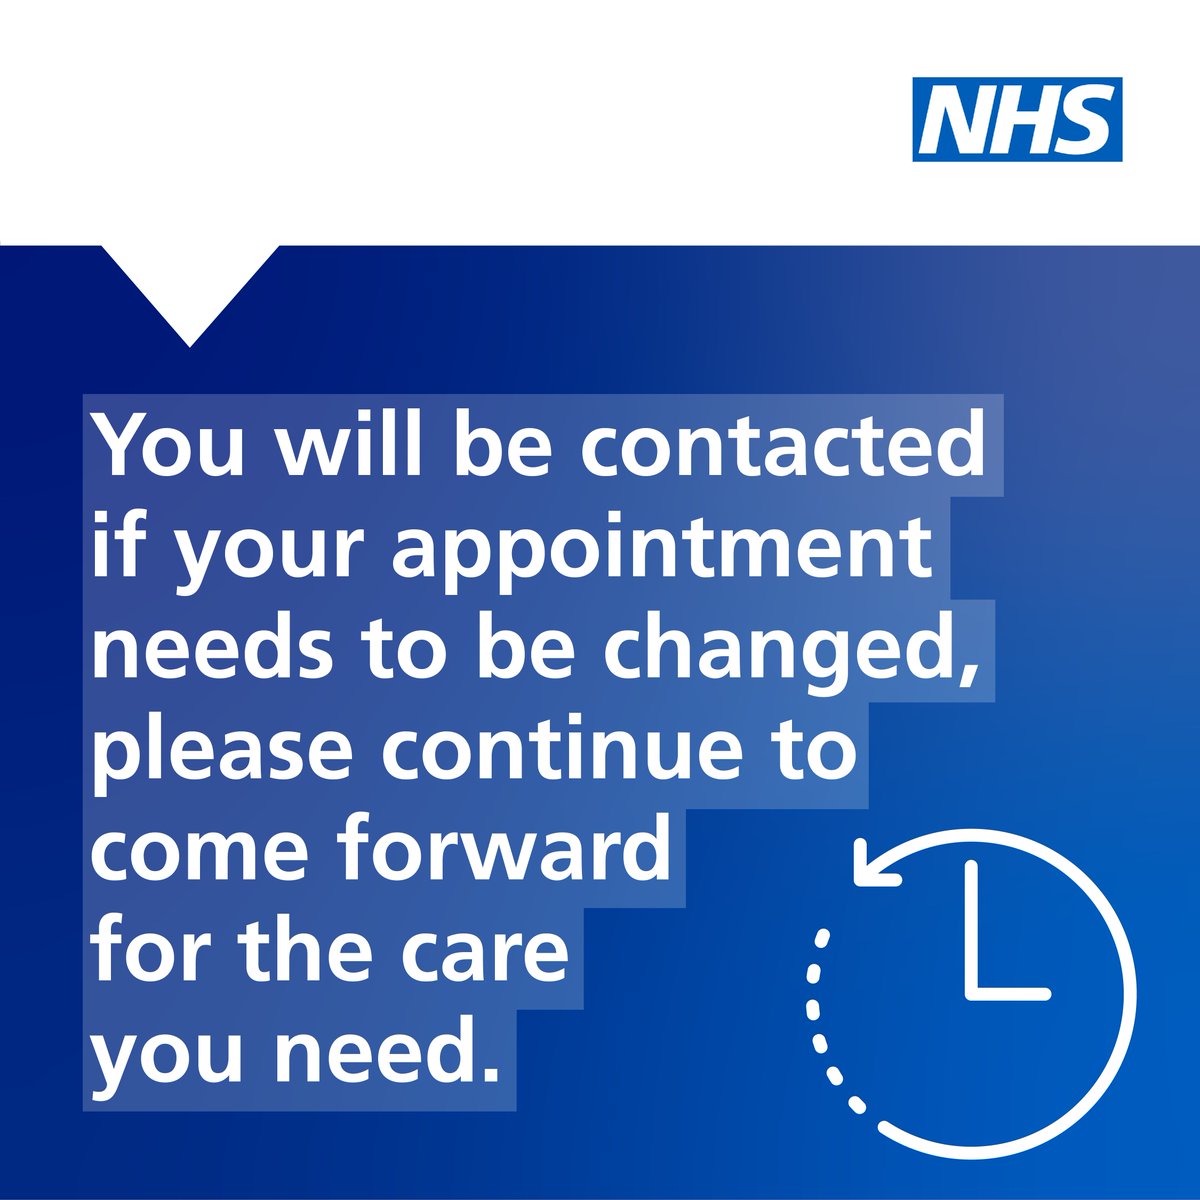 From 7am on Saturday 24 February to 11.59pm on Wednesday 28 February, some doctors in our hospitals will be taking part in industrial action. Our emergency departments (A&Es) will be open, but there may be longer wait times. More information and advice: bit.ly/3MtWYmy